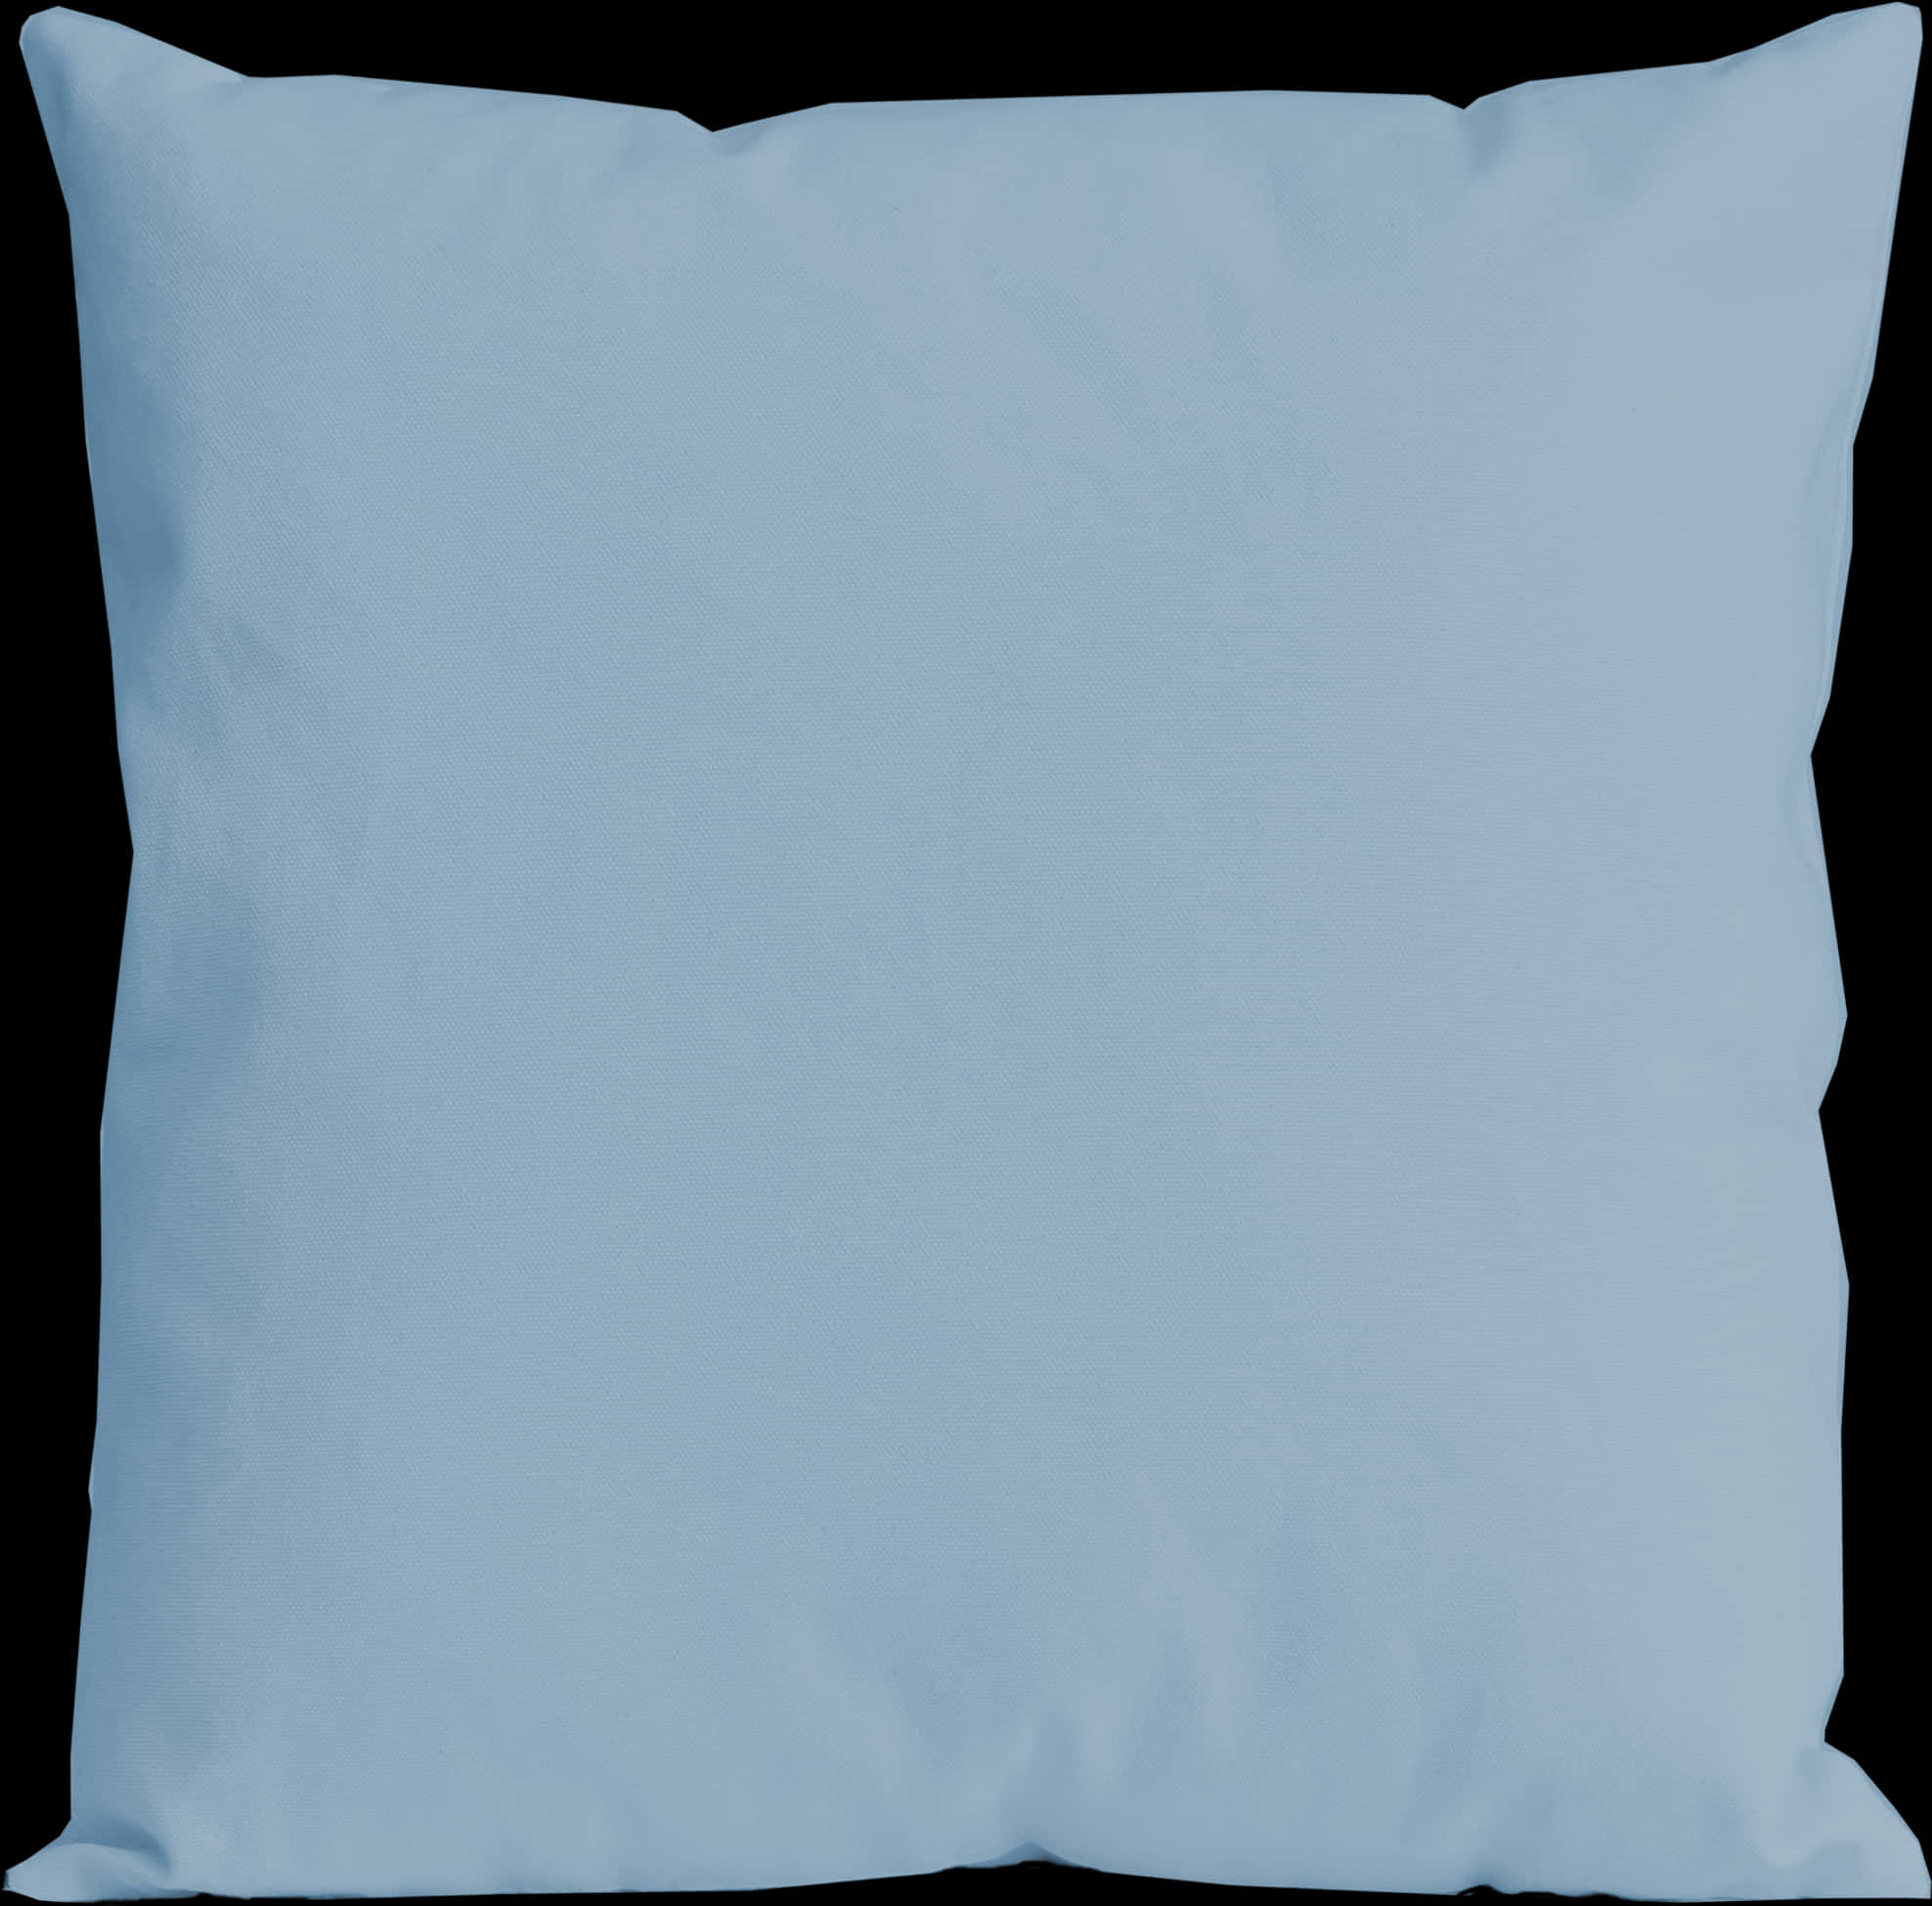 A Blue Pillow On A Black Background